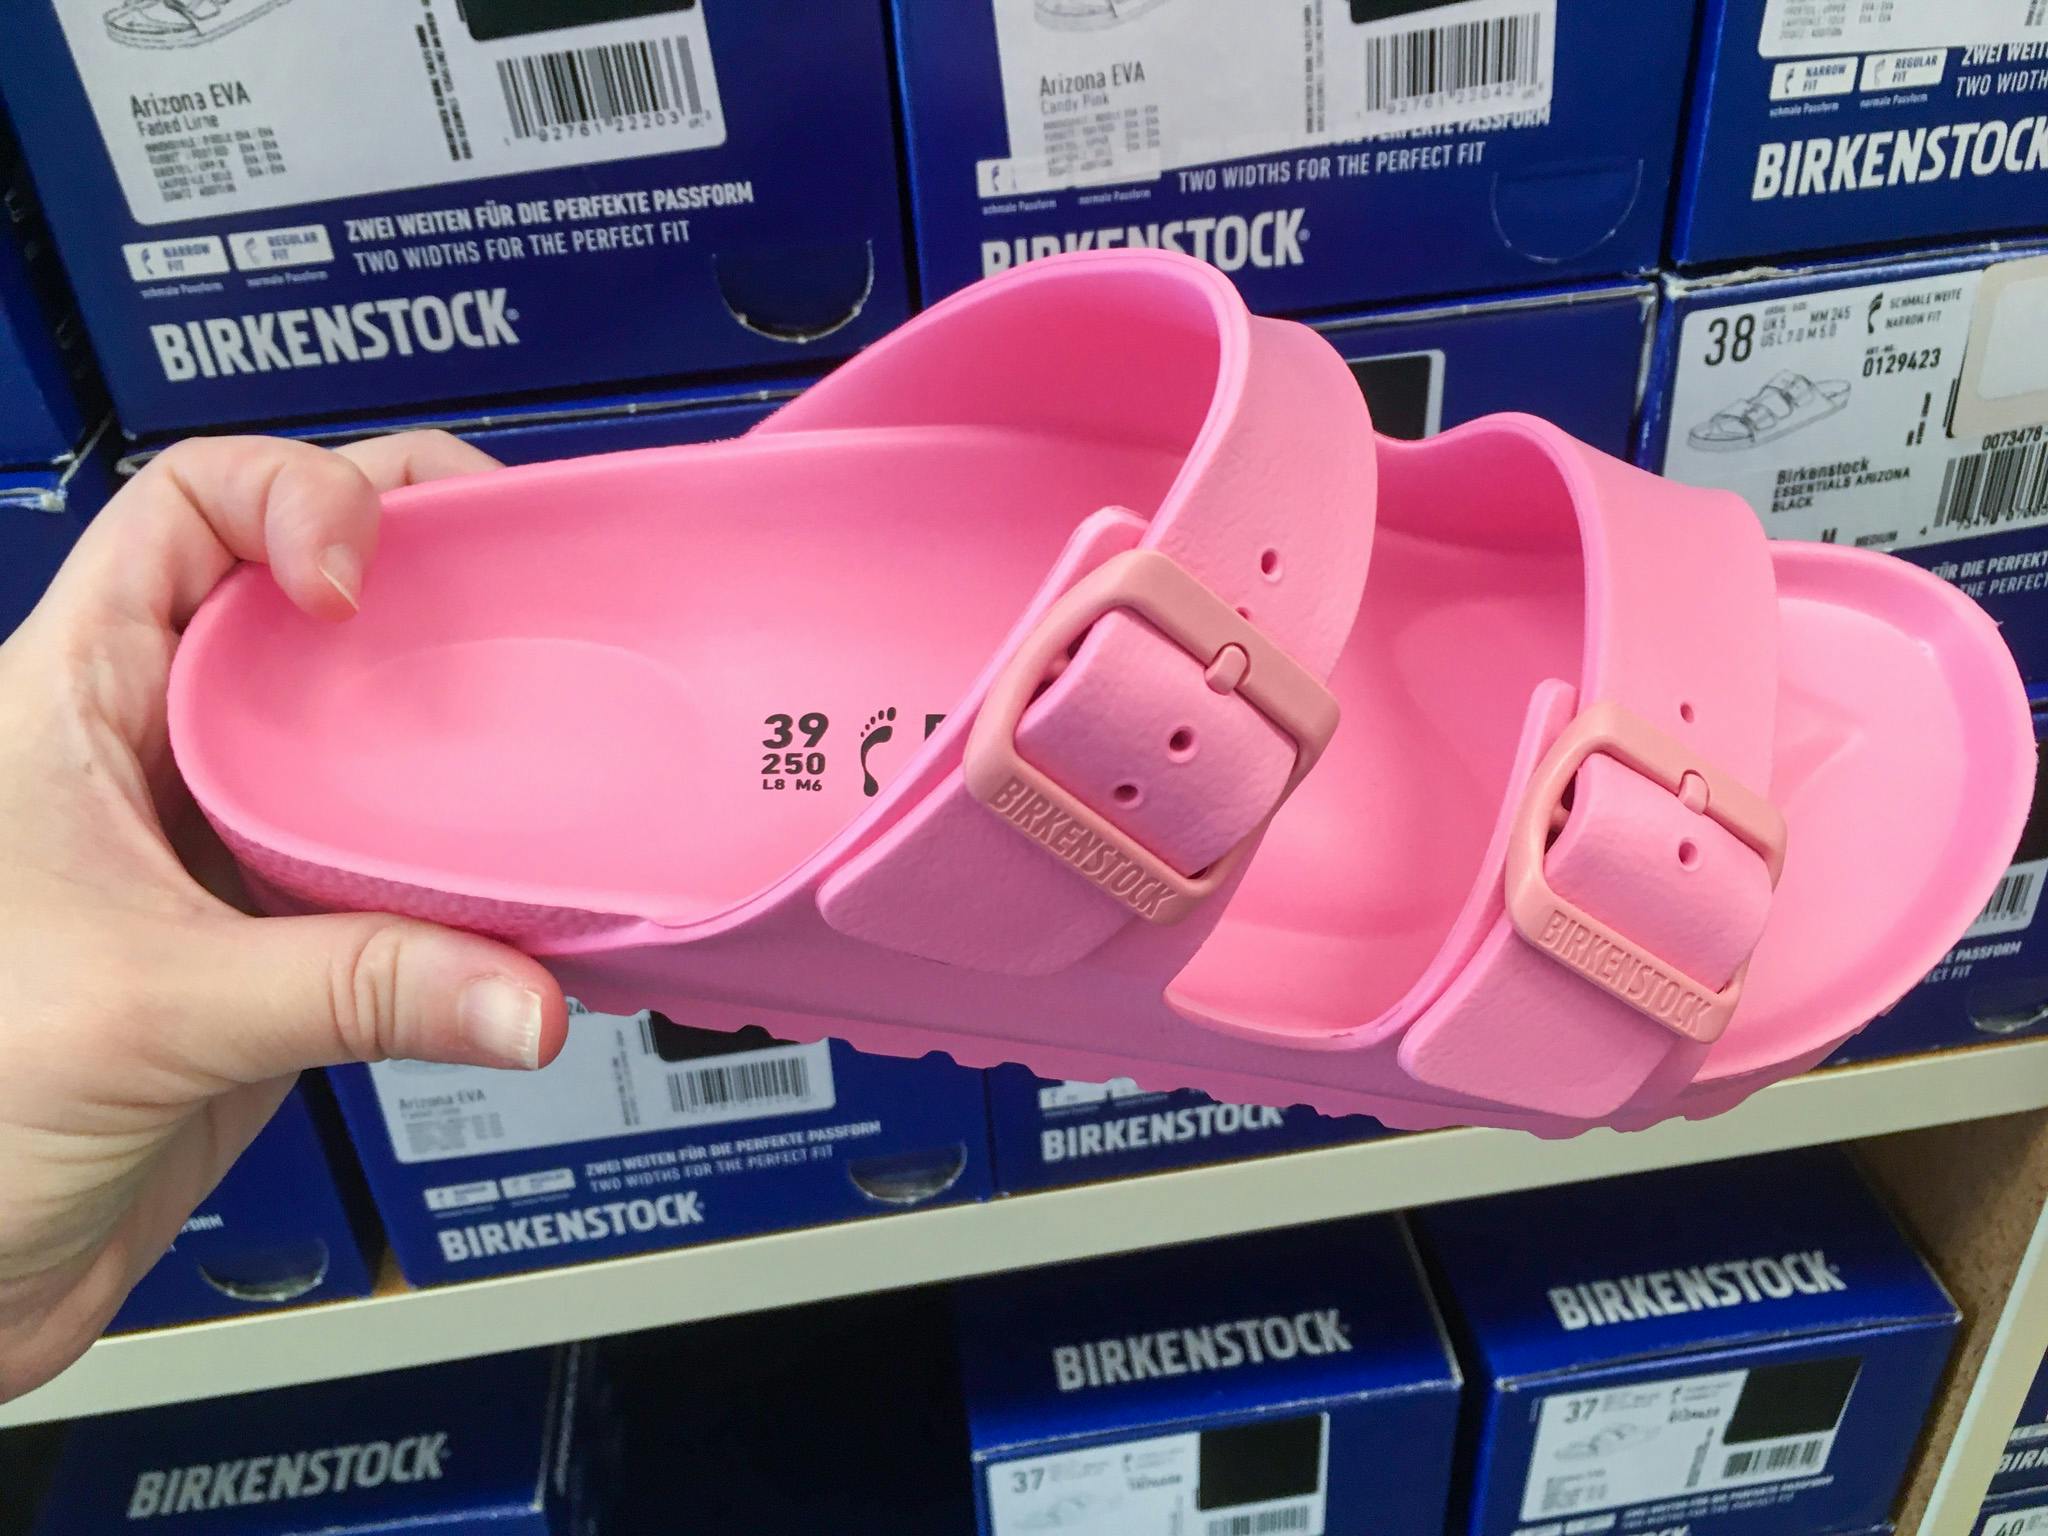 Birkenstock EVA as Low as $29.98 at - The Krazy Coupon Lady